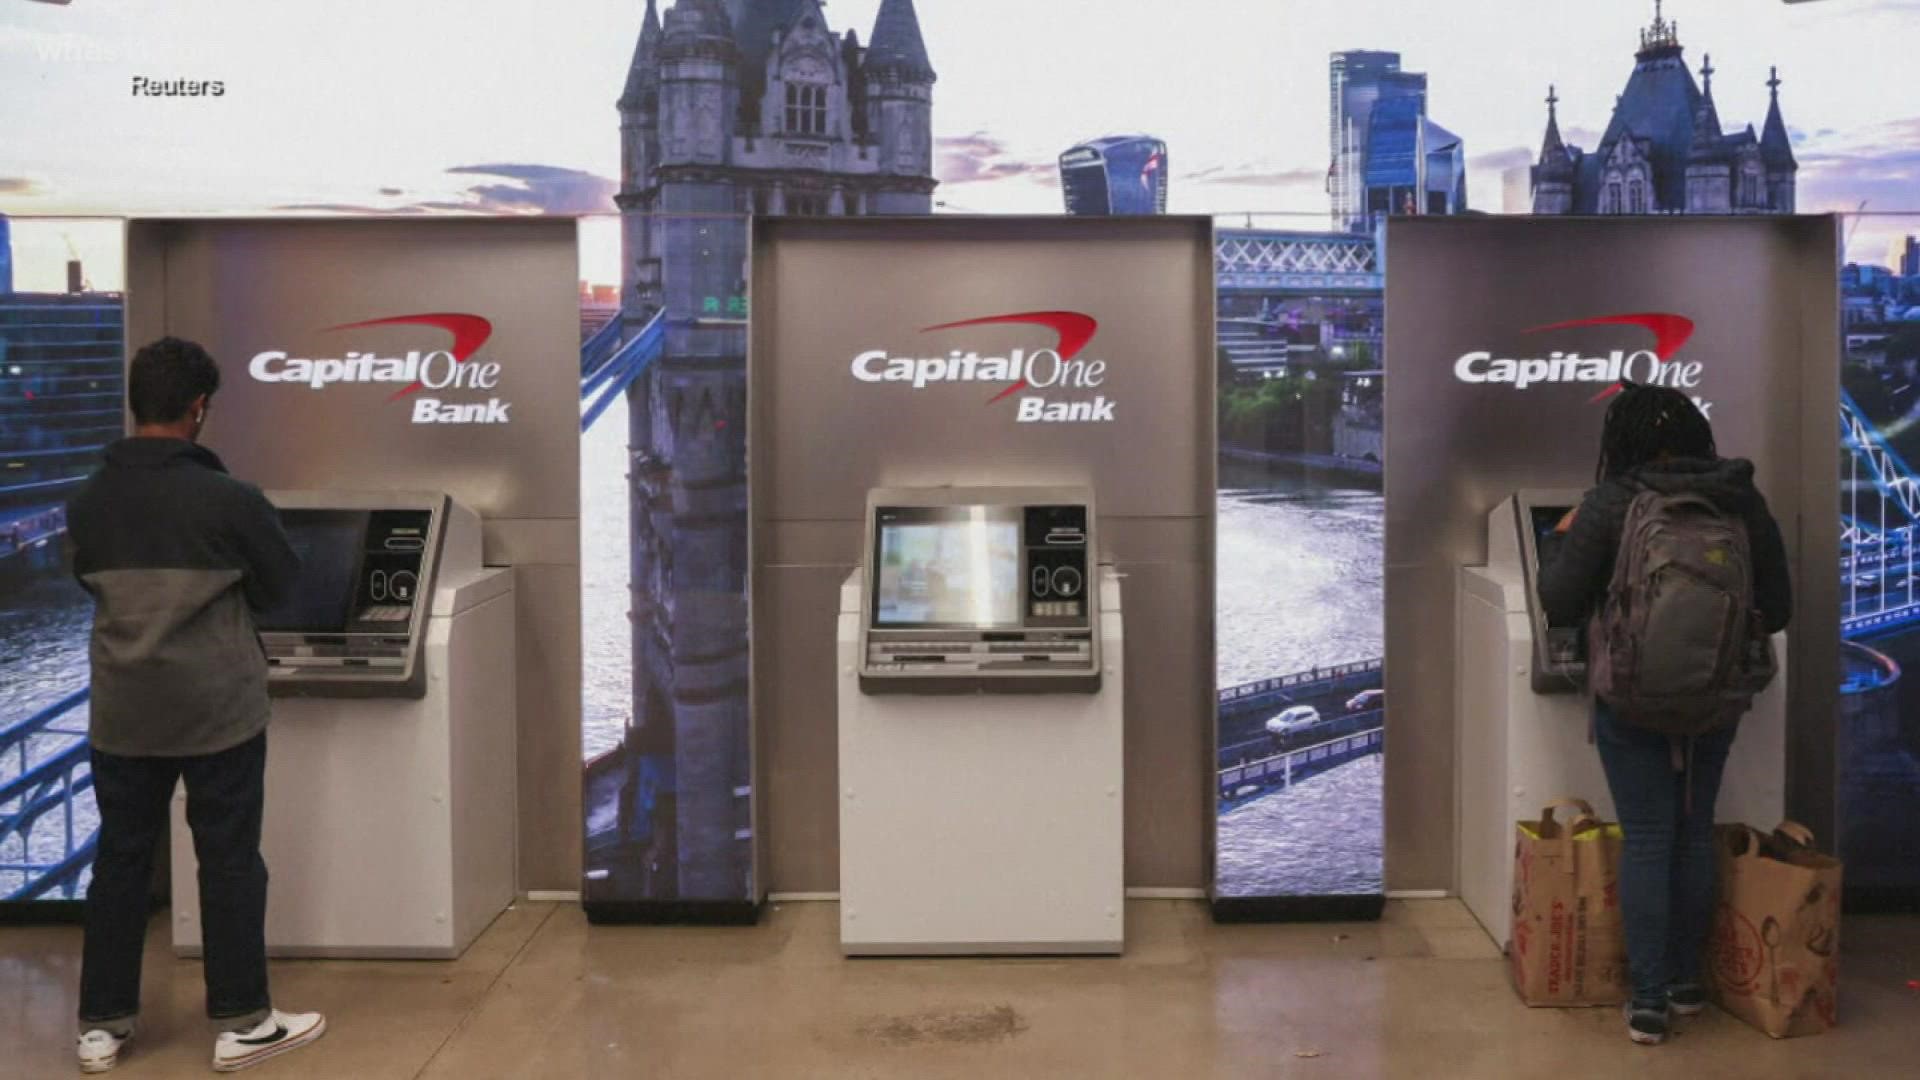 Capitol One becomes the latest financial institution to ditch overdraft fees. Several banks have made the move already, including PNC.